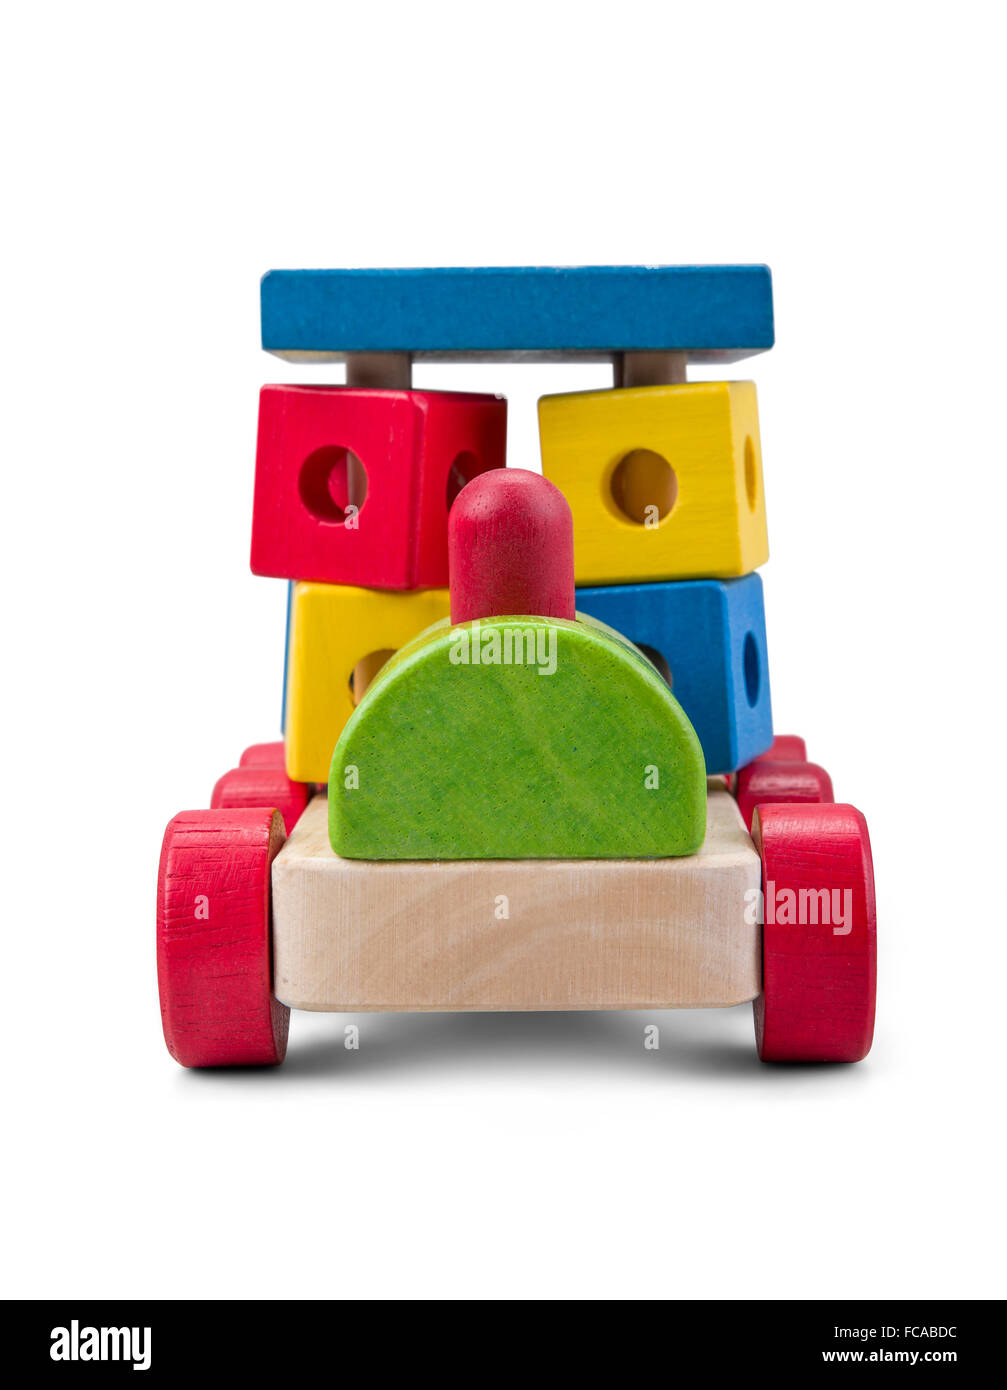 Wooden car toy with colorful blocks isolated over white with clipping path Stock Photo